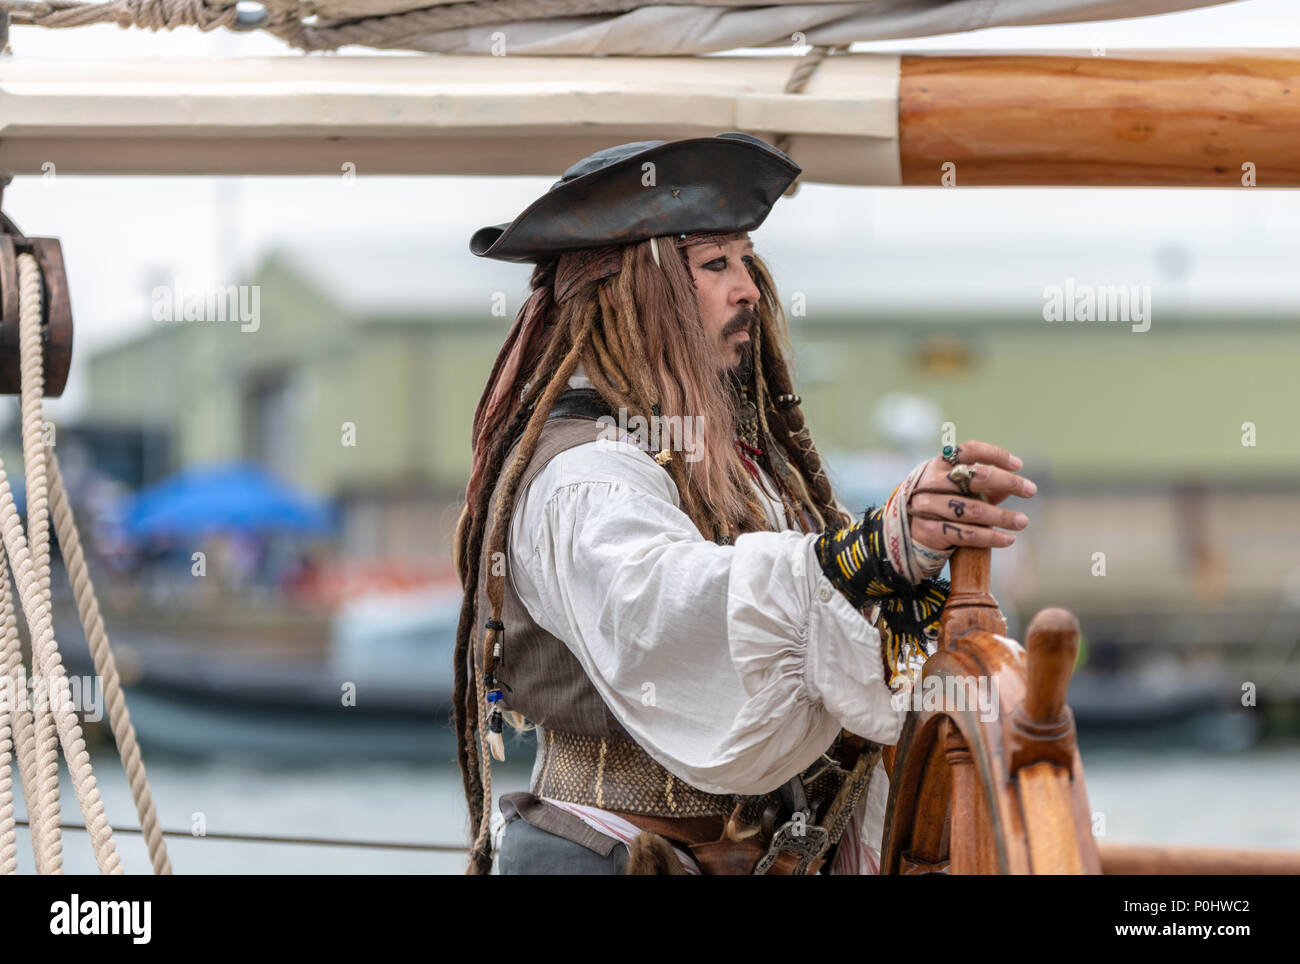 Poole, UK. 9th June, 2018. Capatin Jack Sparrow look-a-like on a boat the Poole Harbour Boat Show, a free maritime festival in Dorset. Credit: Thomas Faull/Alamy Live News Stock Photo